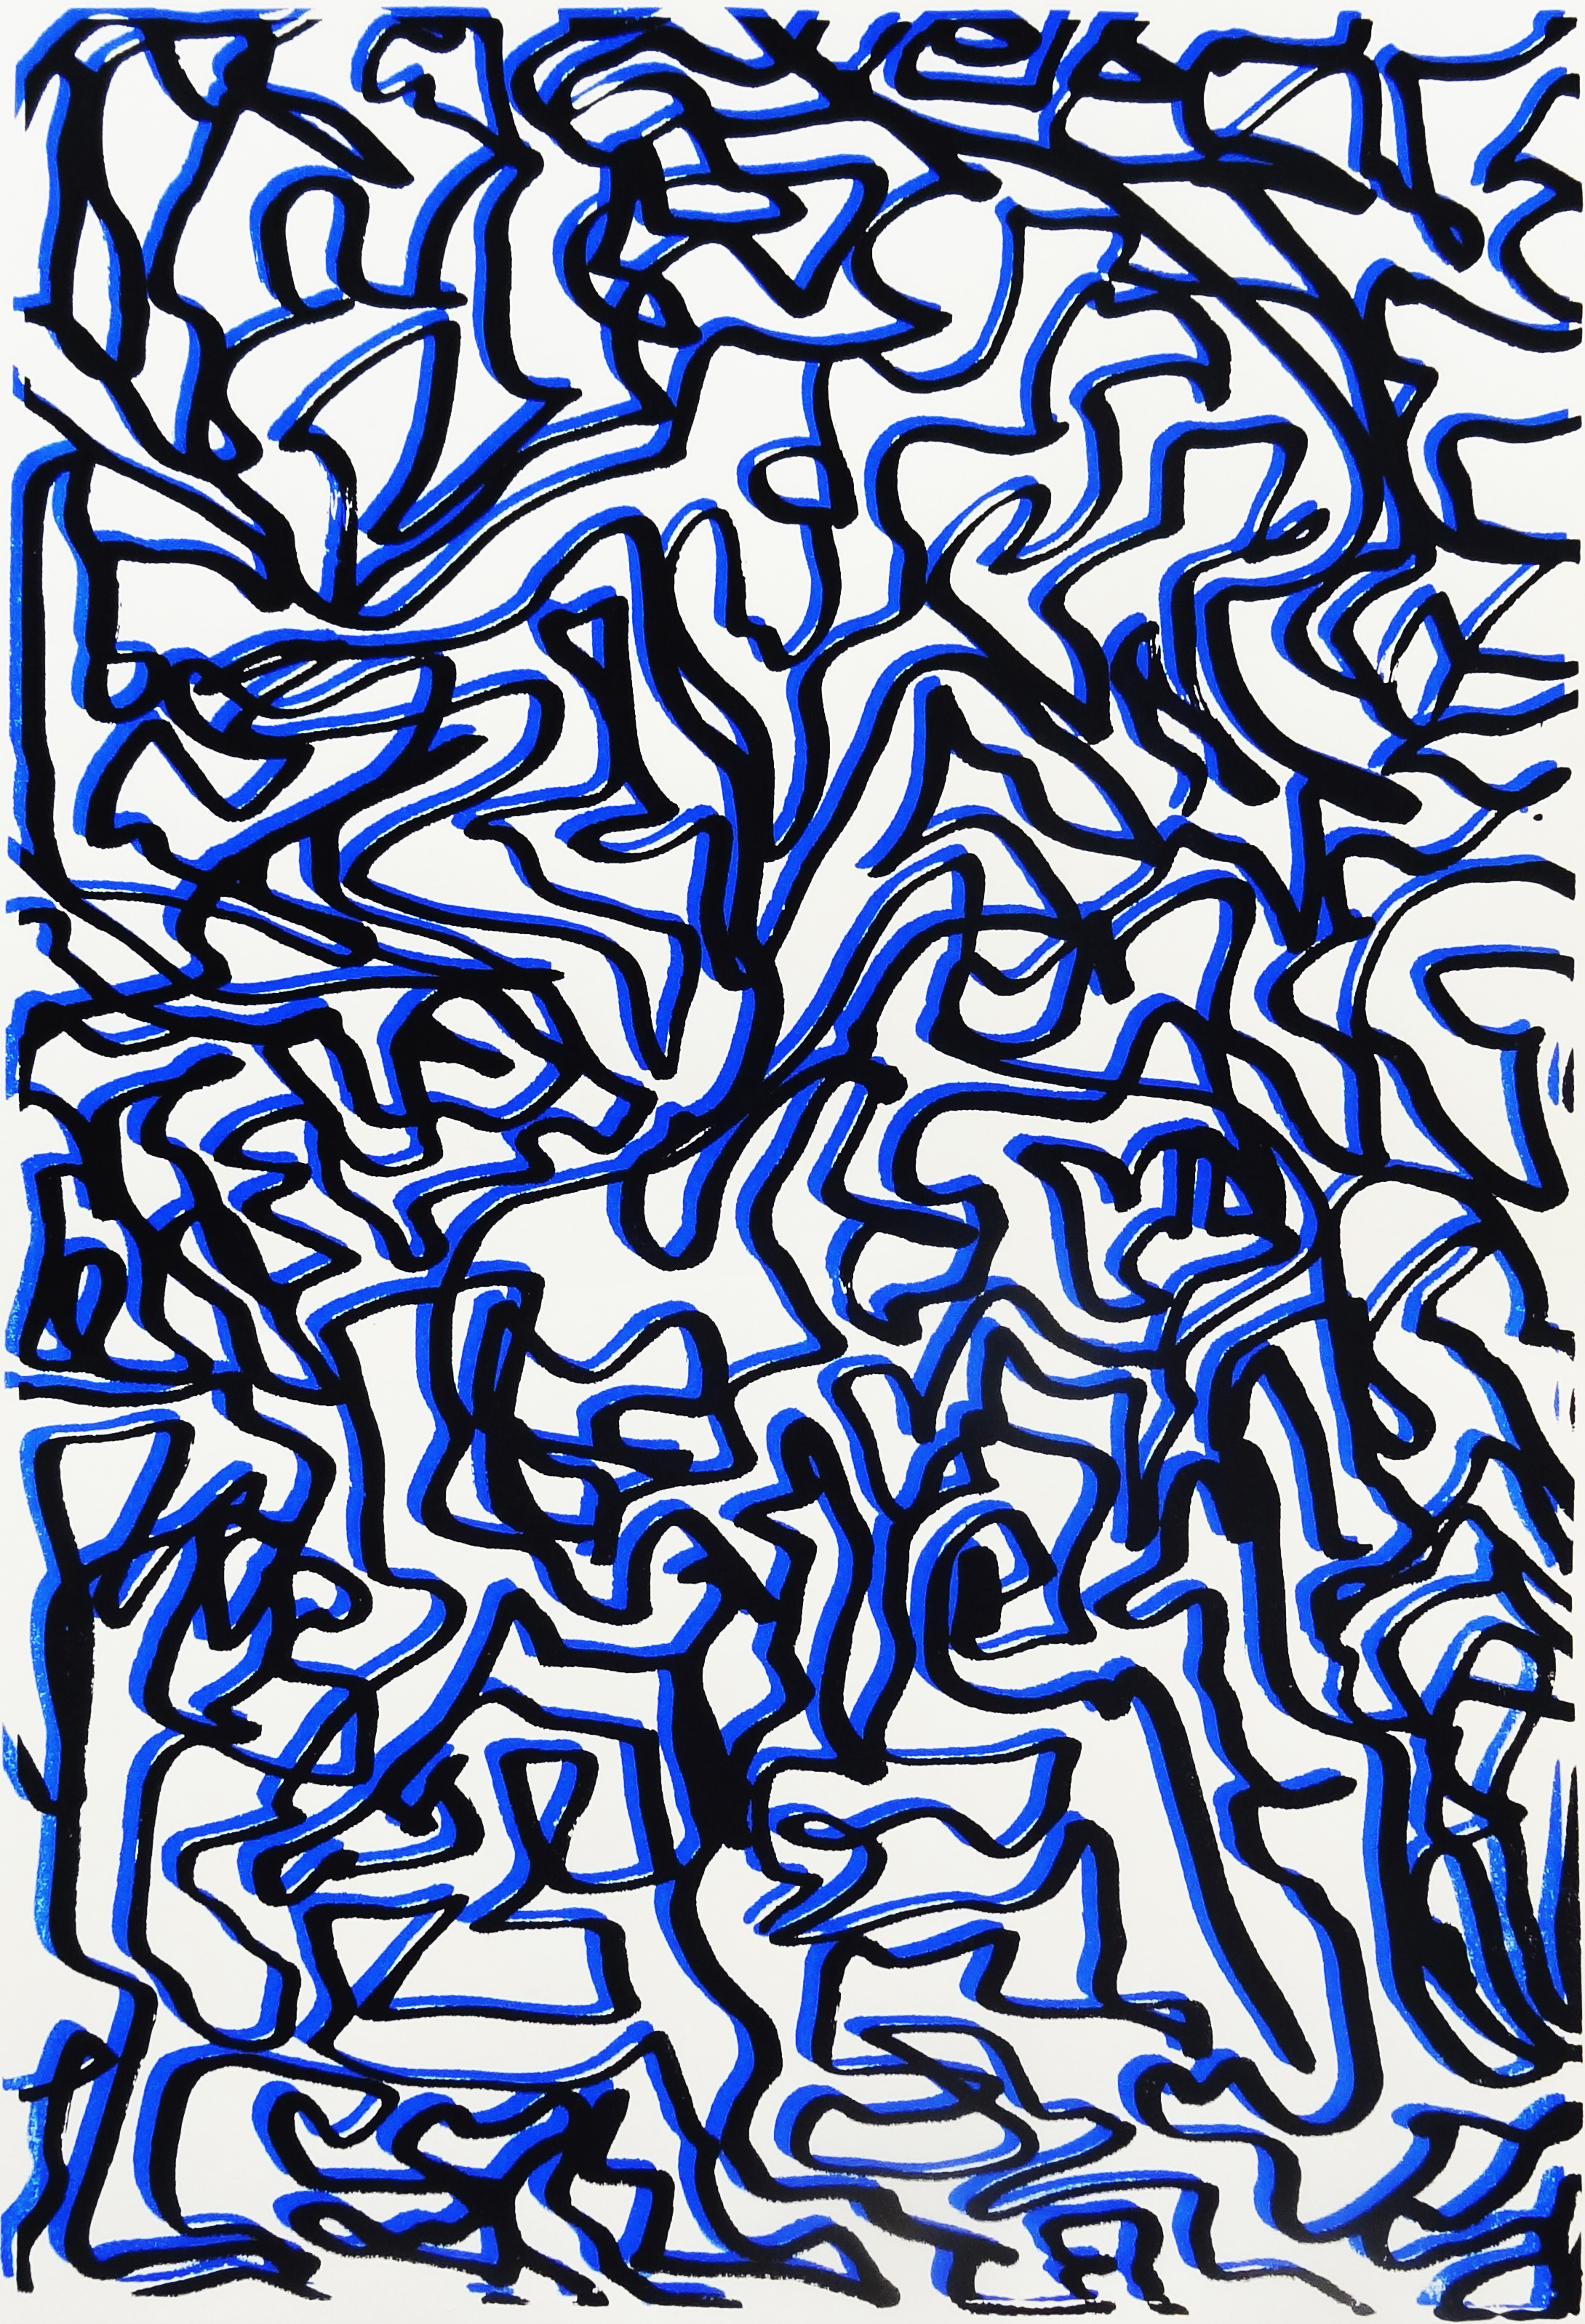  Untitled, 2015 acrylic on paper edition of 3 screenprint 42,0 x 29,7 cm (1-15) 